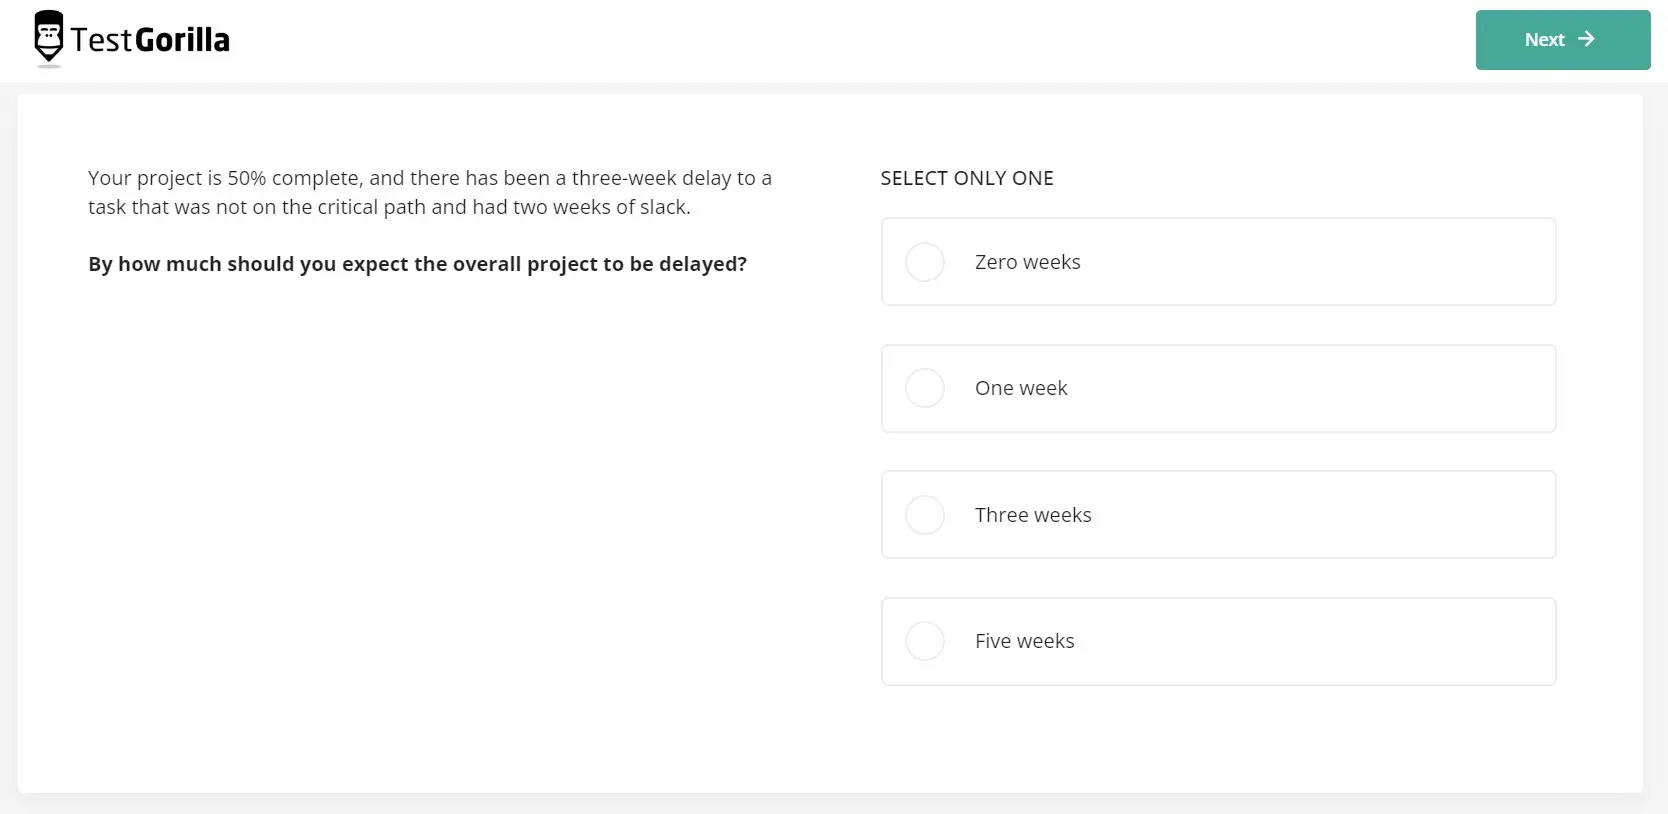 An example question from TestGorilla's Project Management test